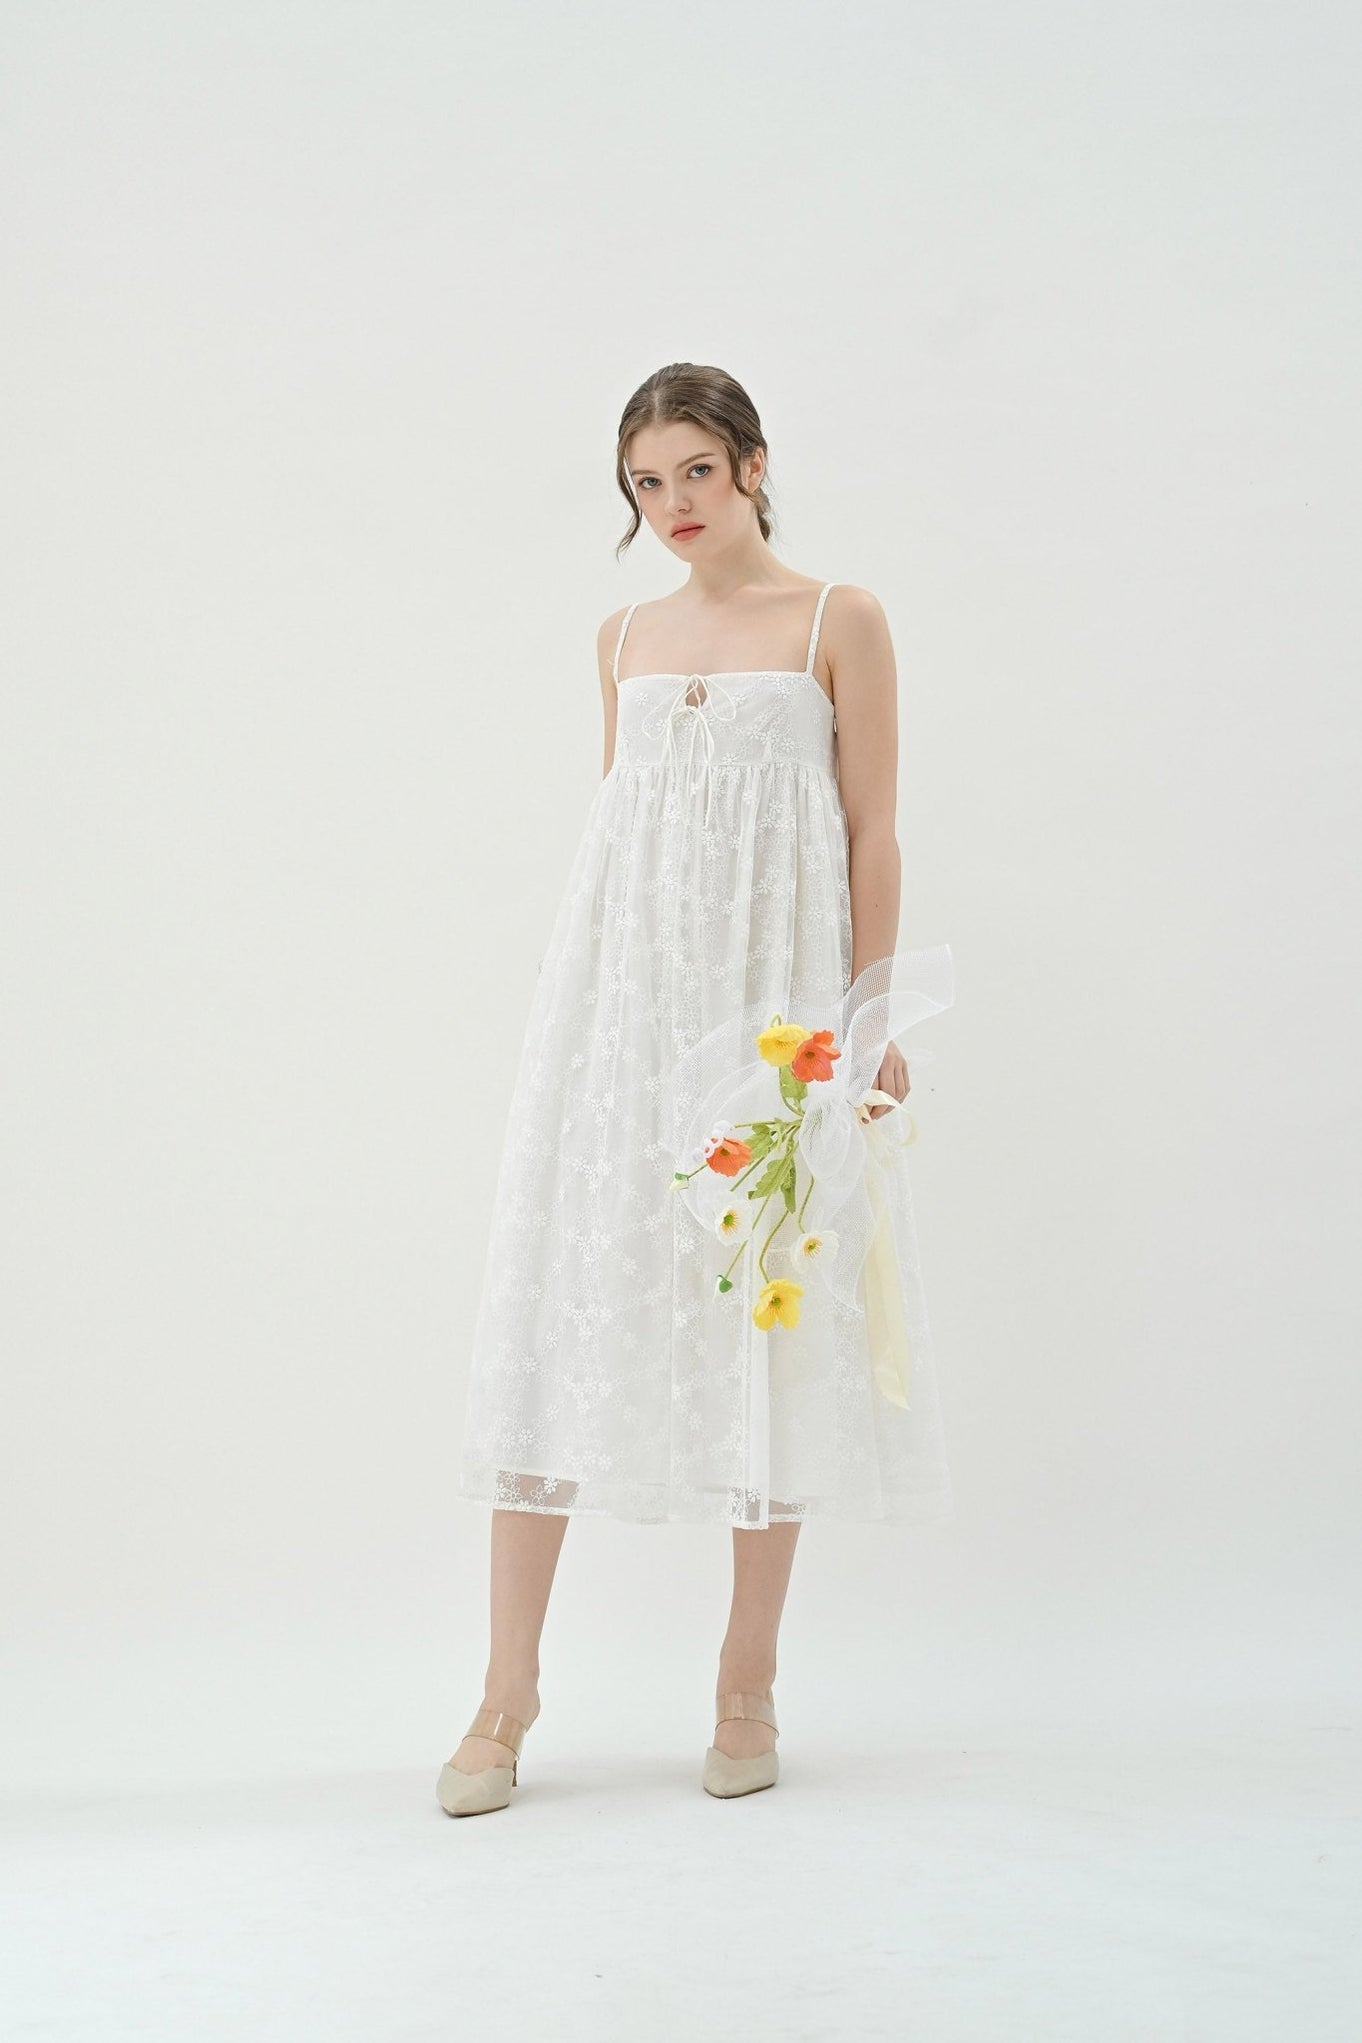 Dresses | ÁINE Ready to Wear | Shop Mindfully-Made Pieces